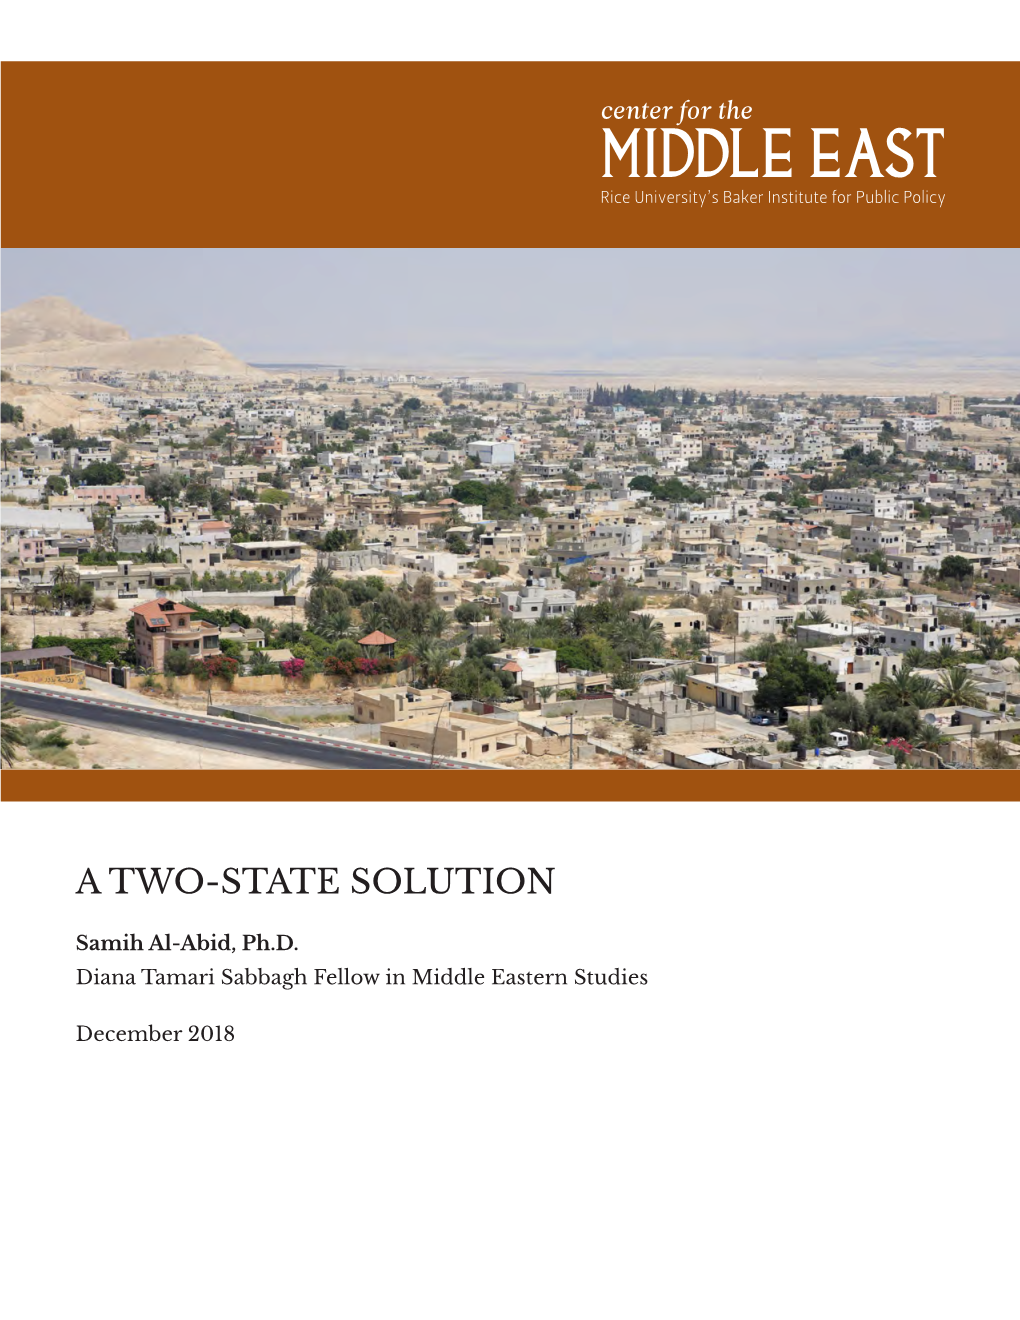 A Two-State Solution